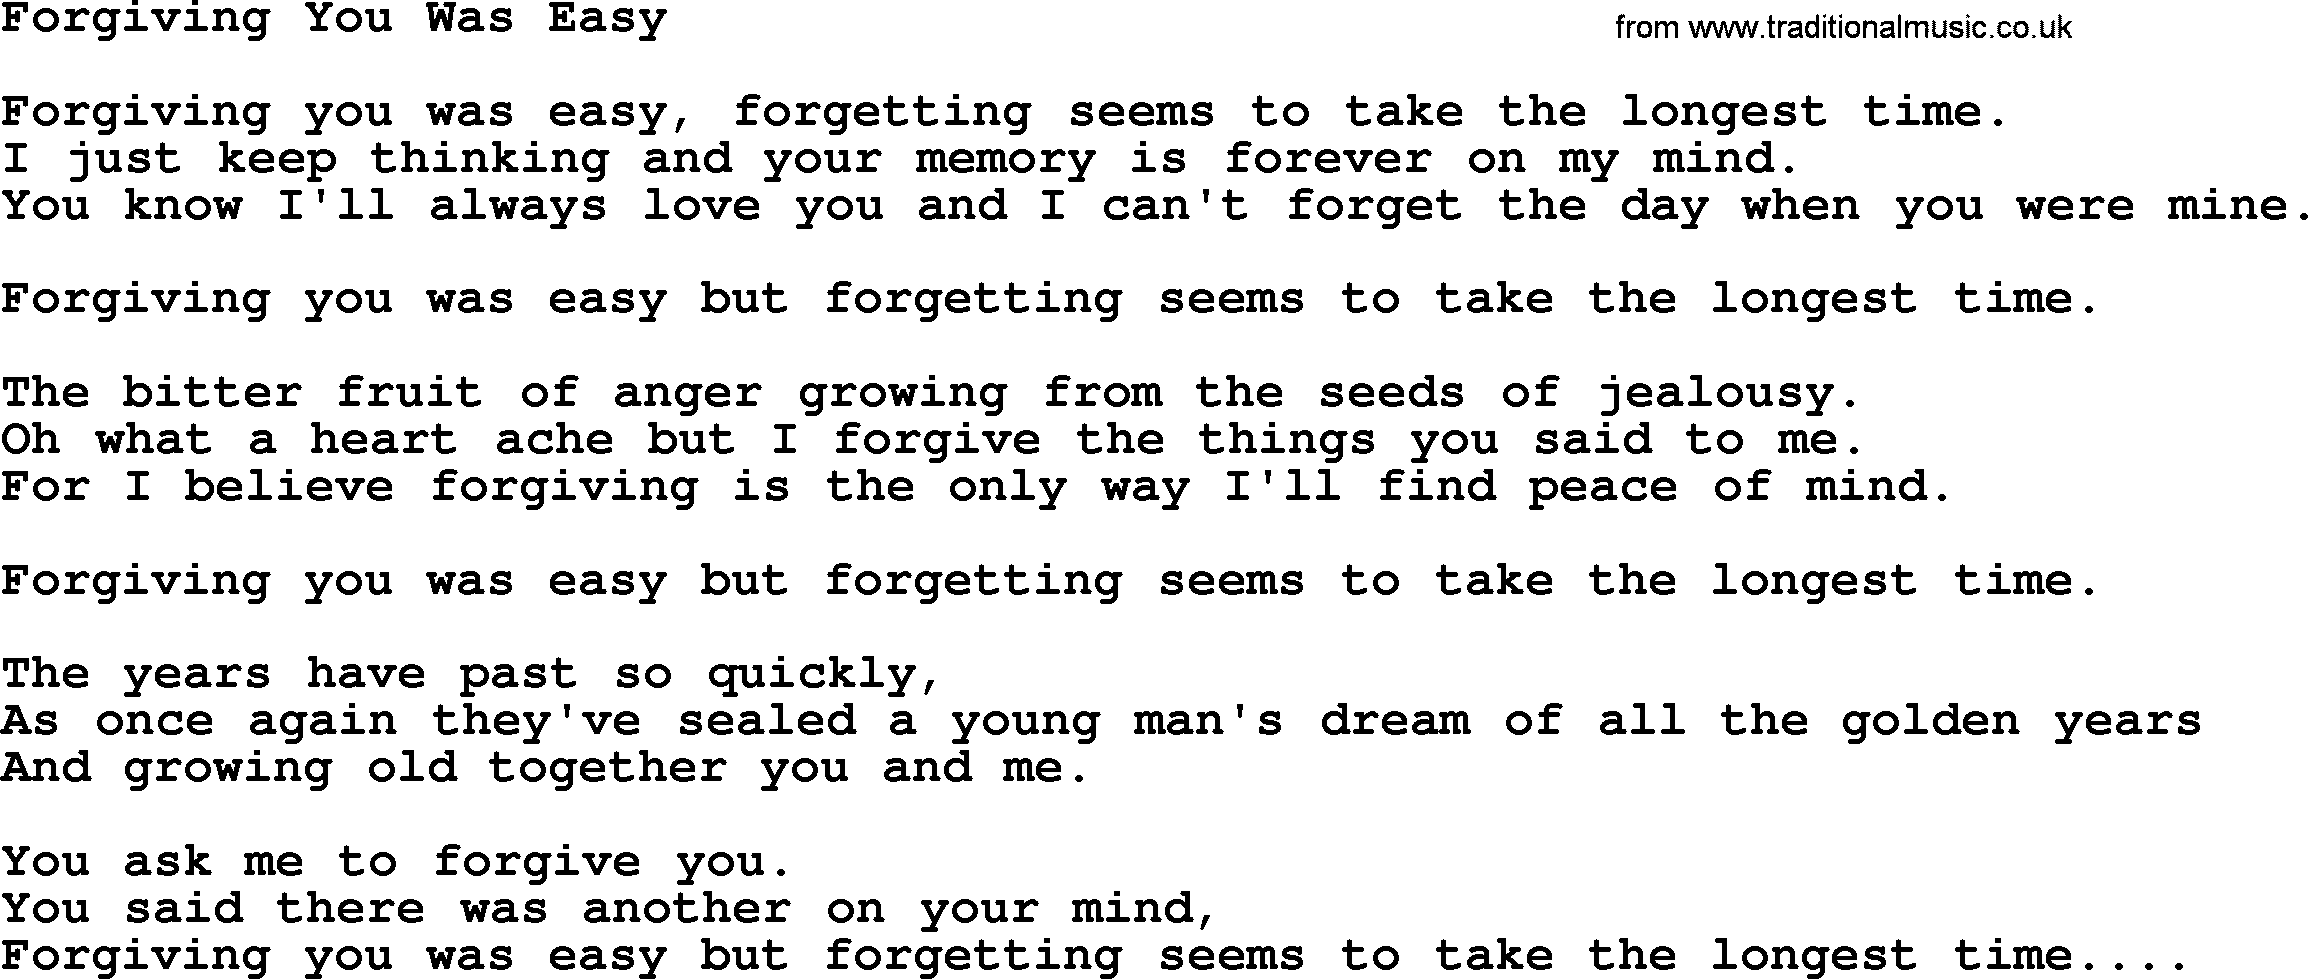 Willie Nelson song: Forgiving You Was Easy lyrics